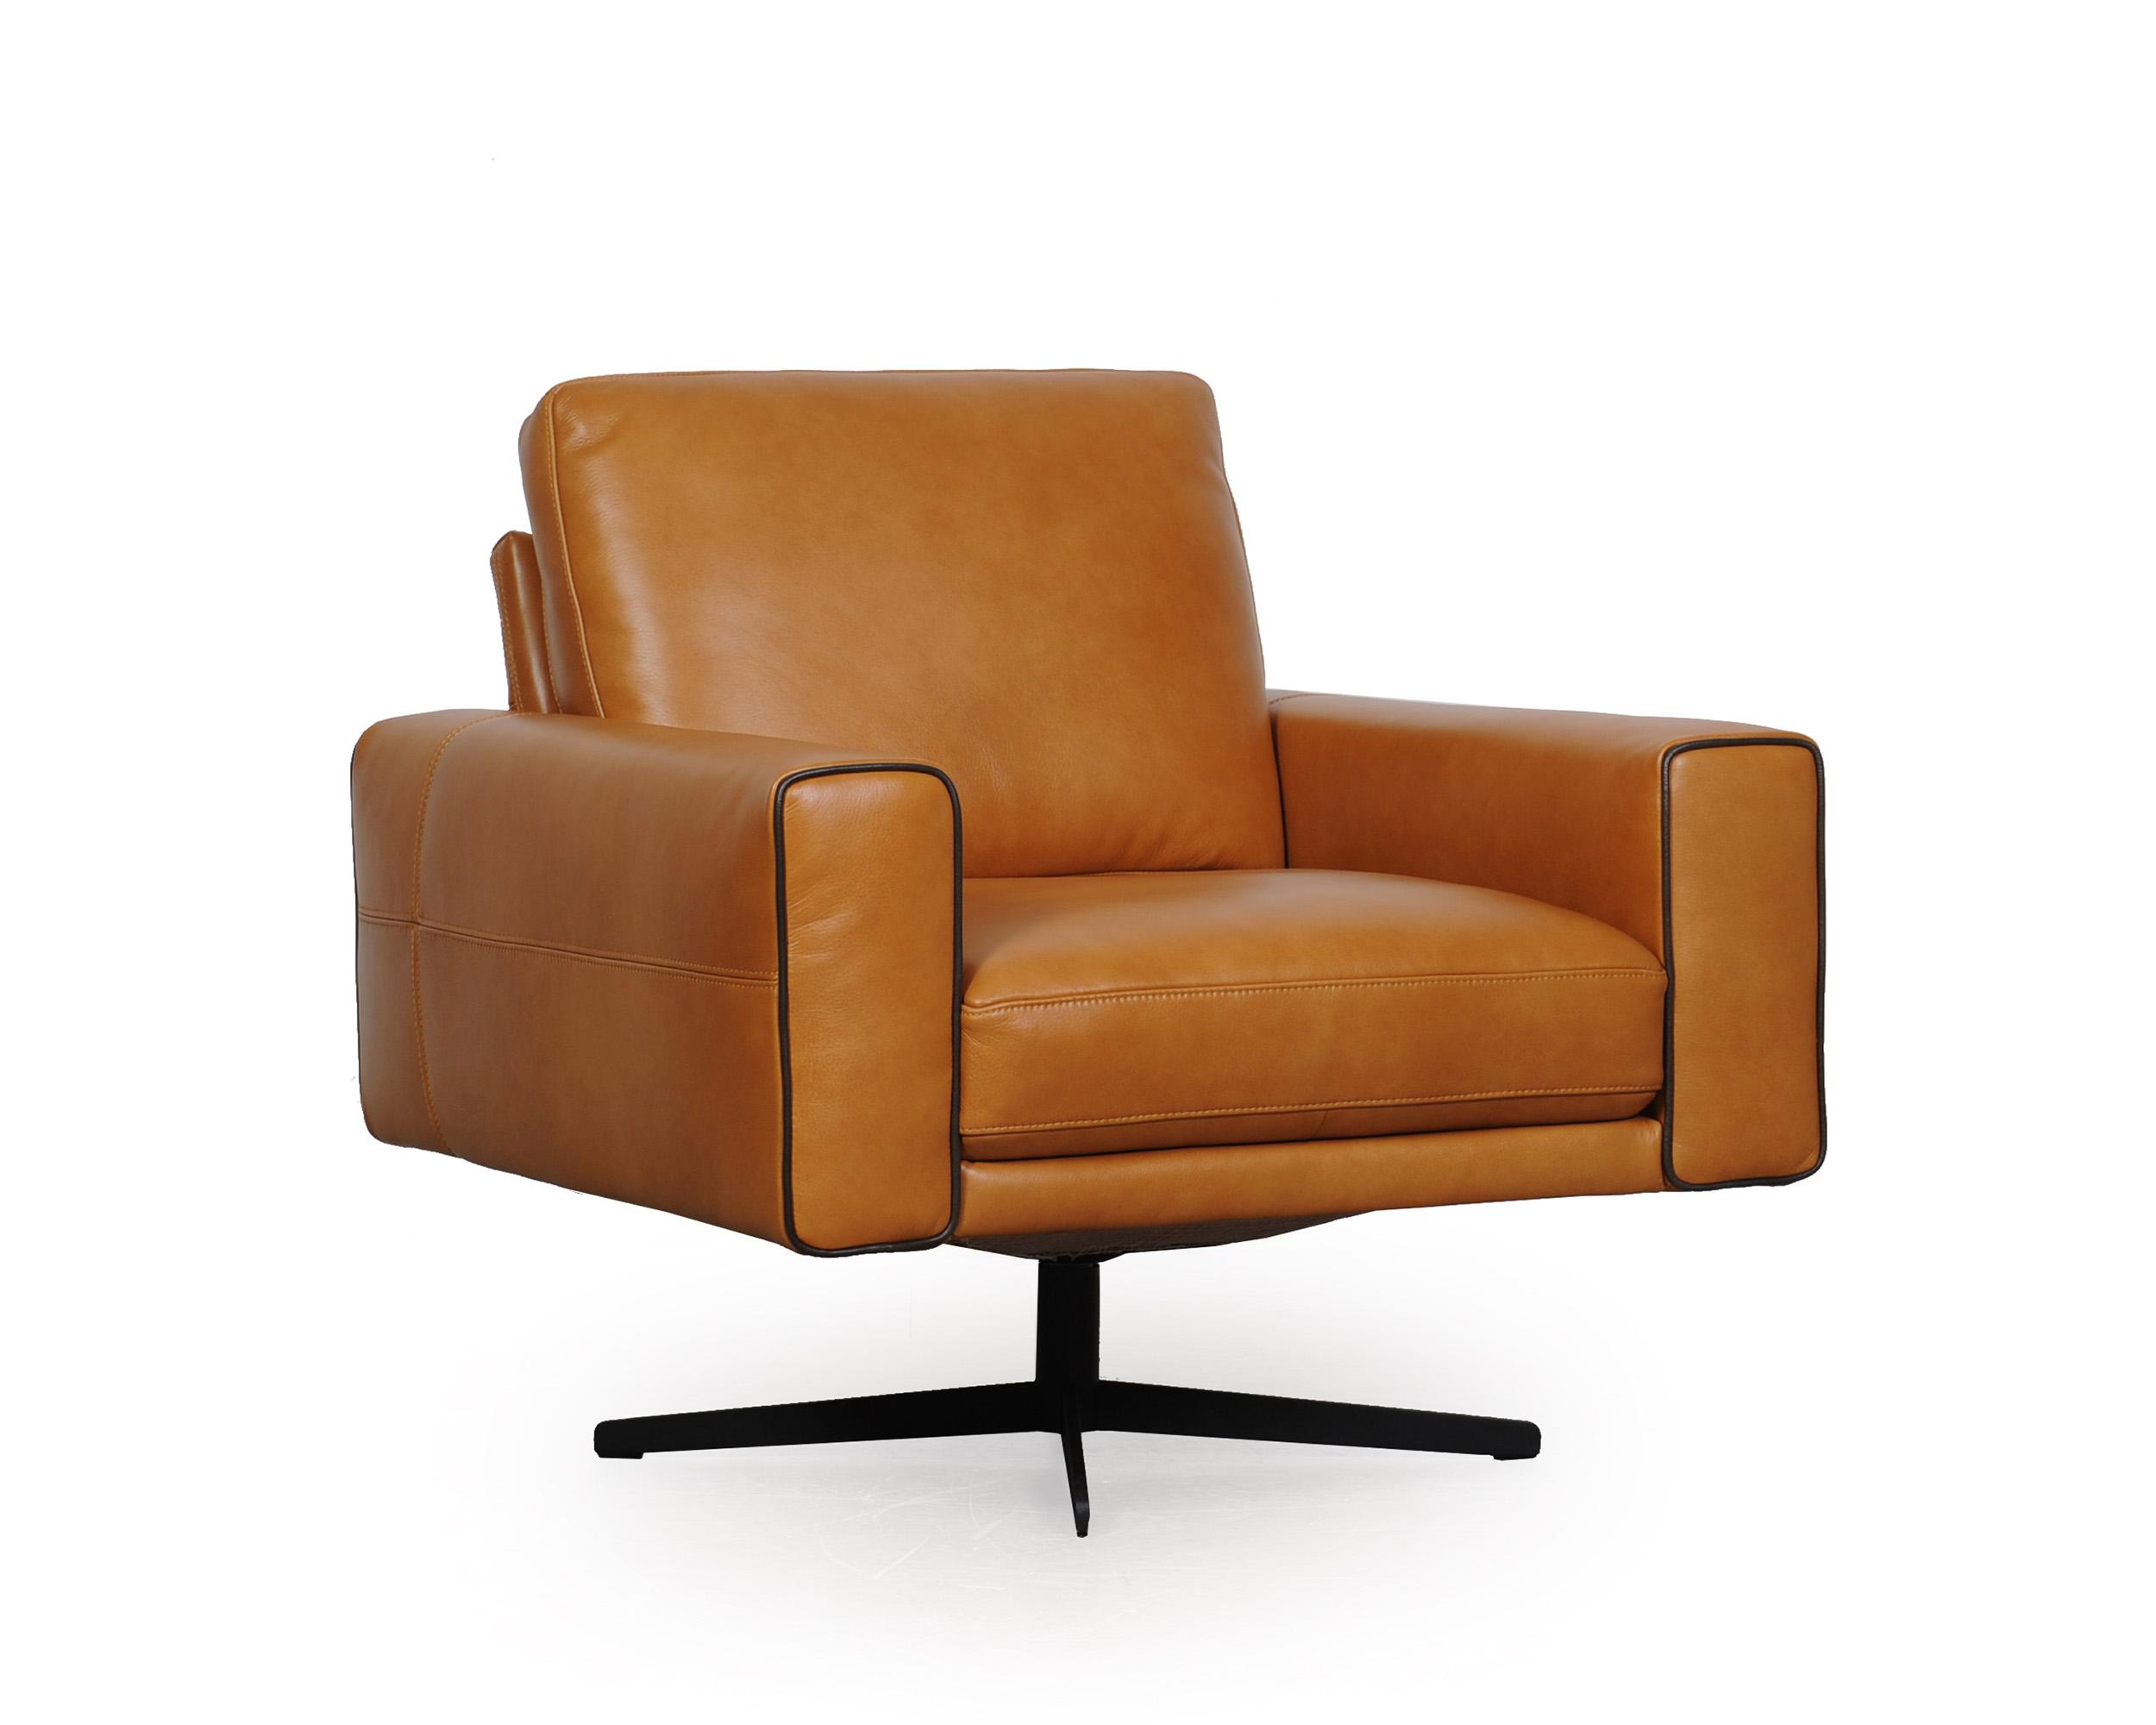 Contemporary, Modern Arm Chair Colette 593 59306B1857 in Tan Full Leather